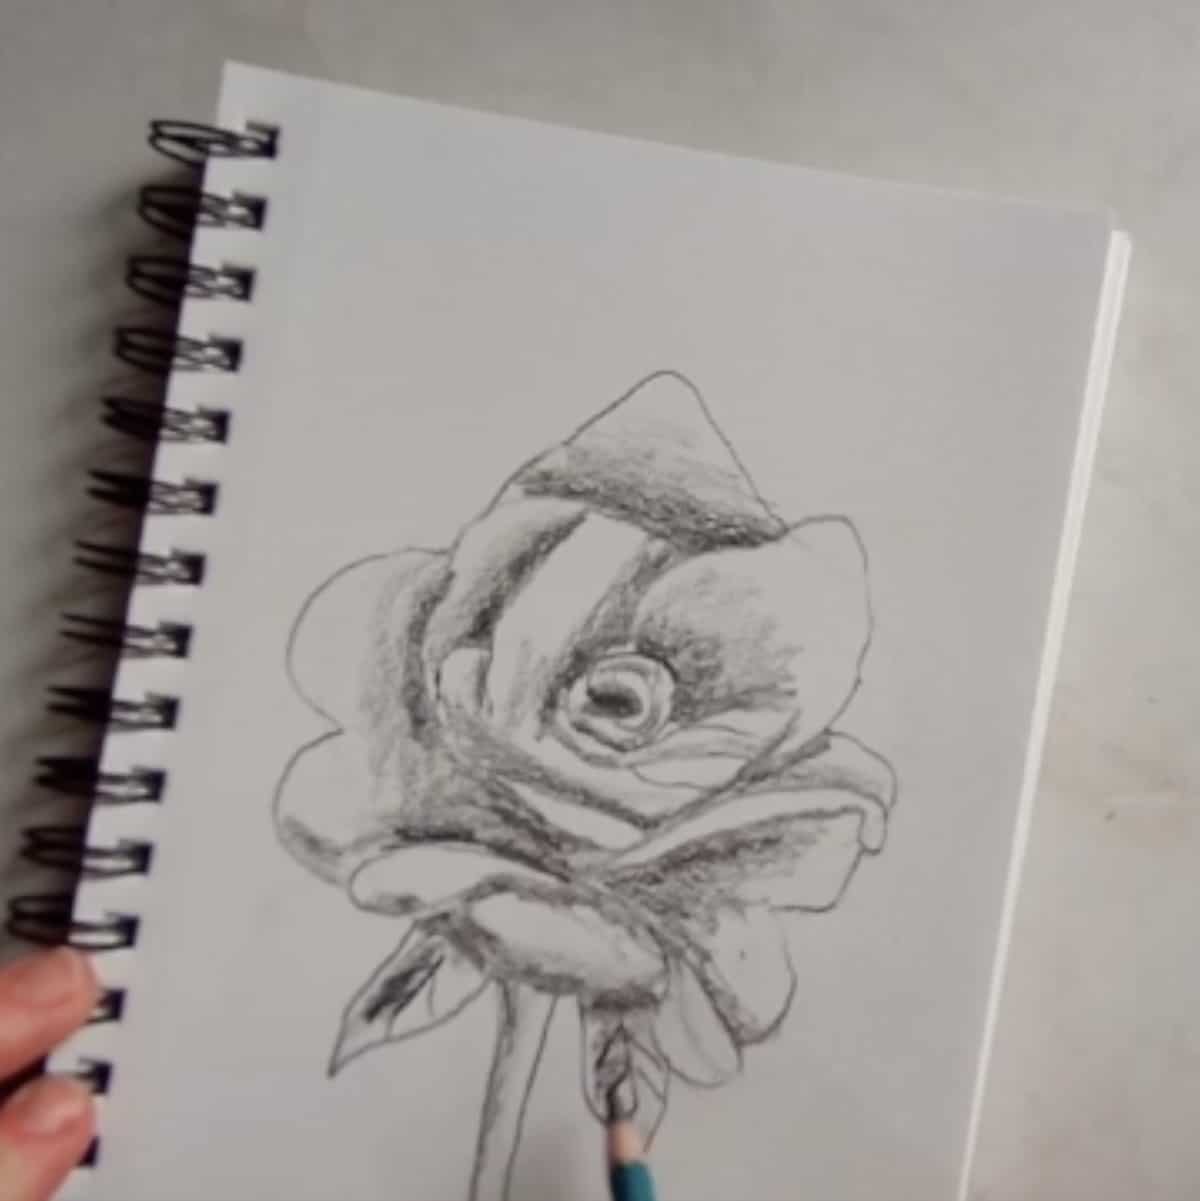 How to Draw Roses: 8 Easy Step-by-Step Guides in 1